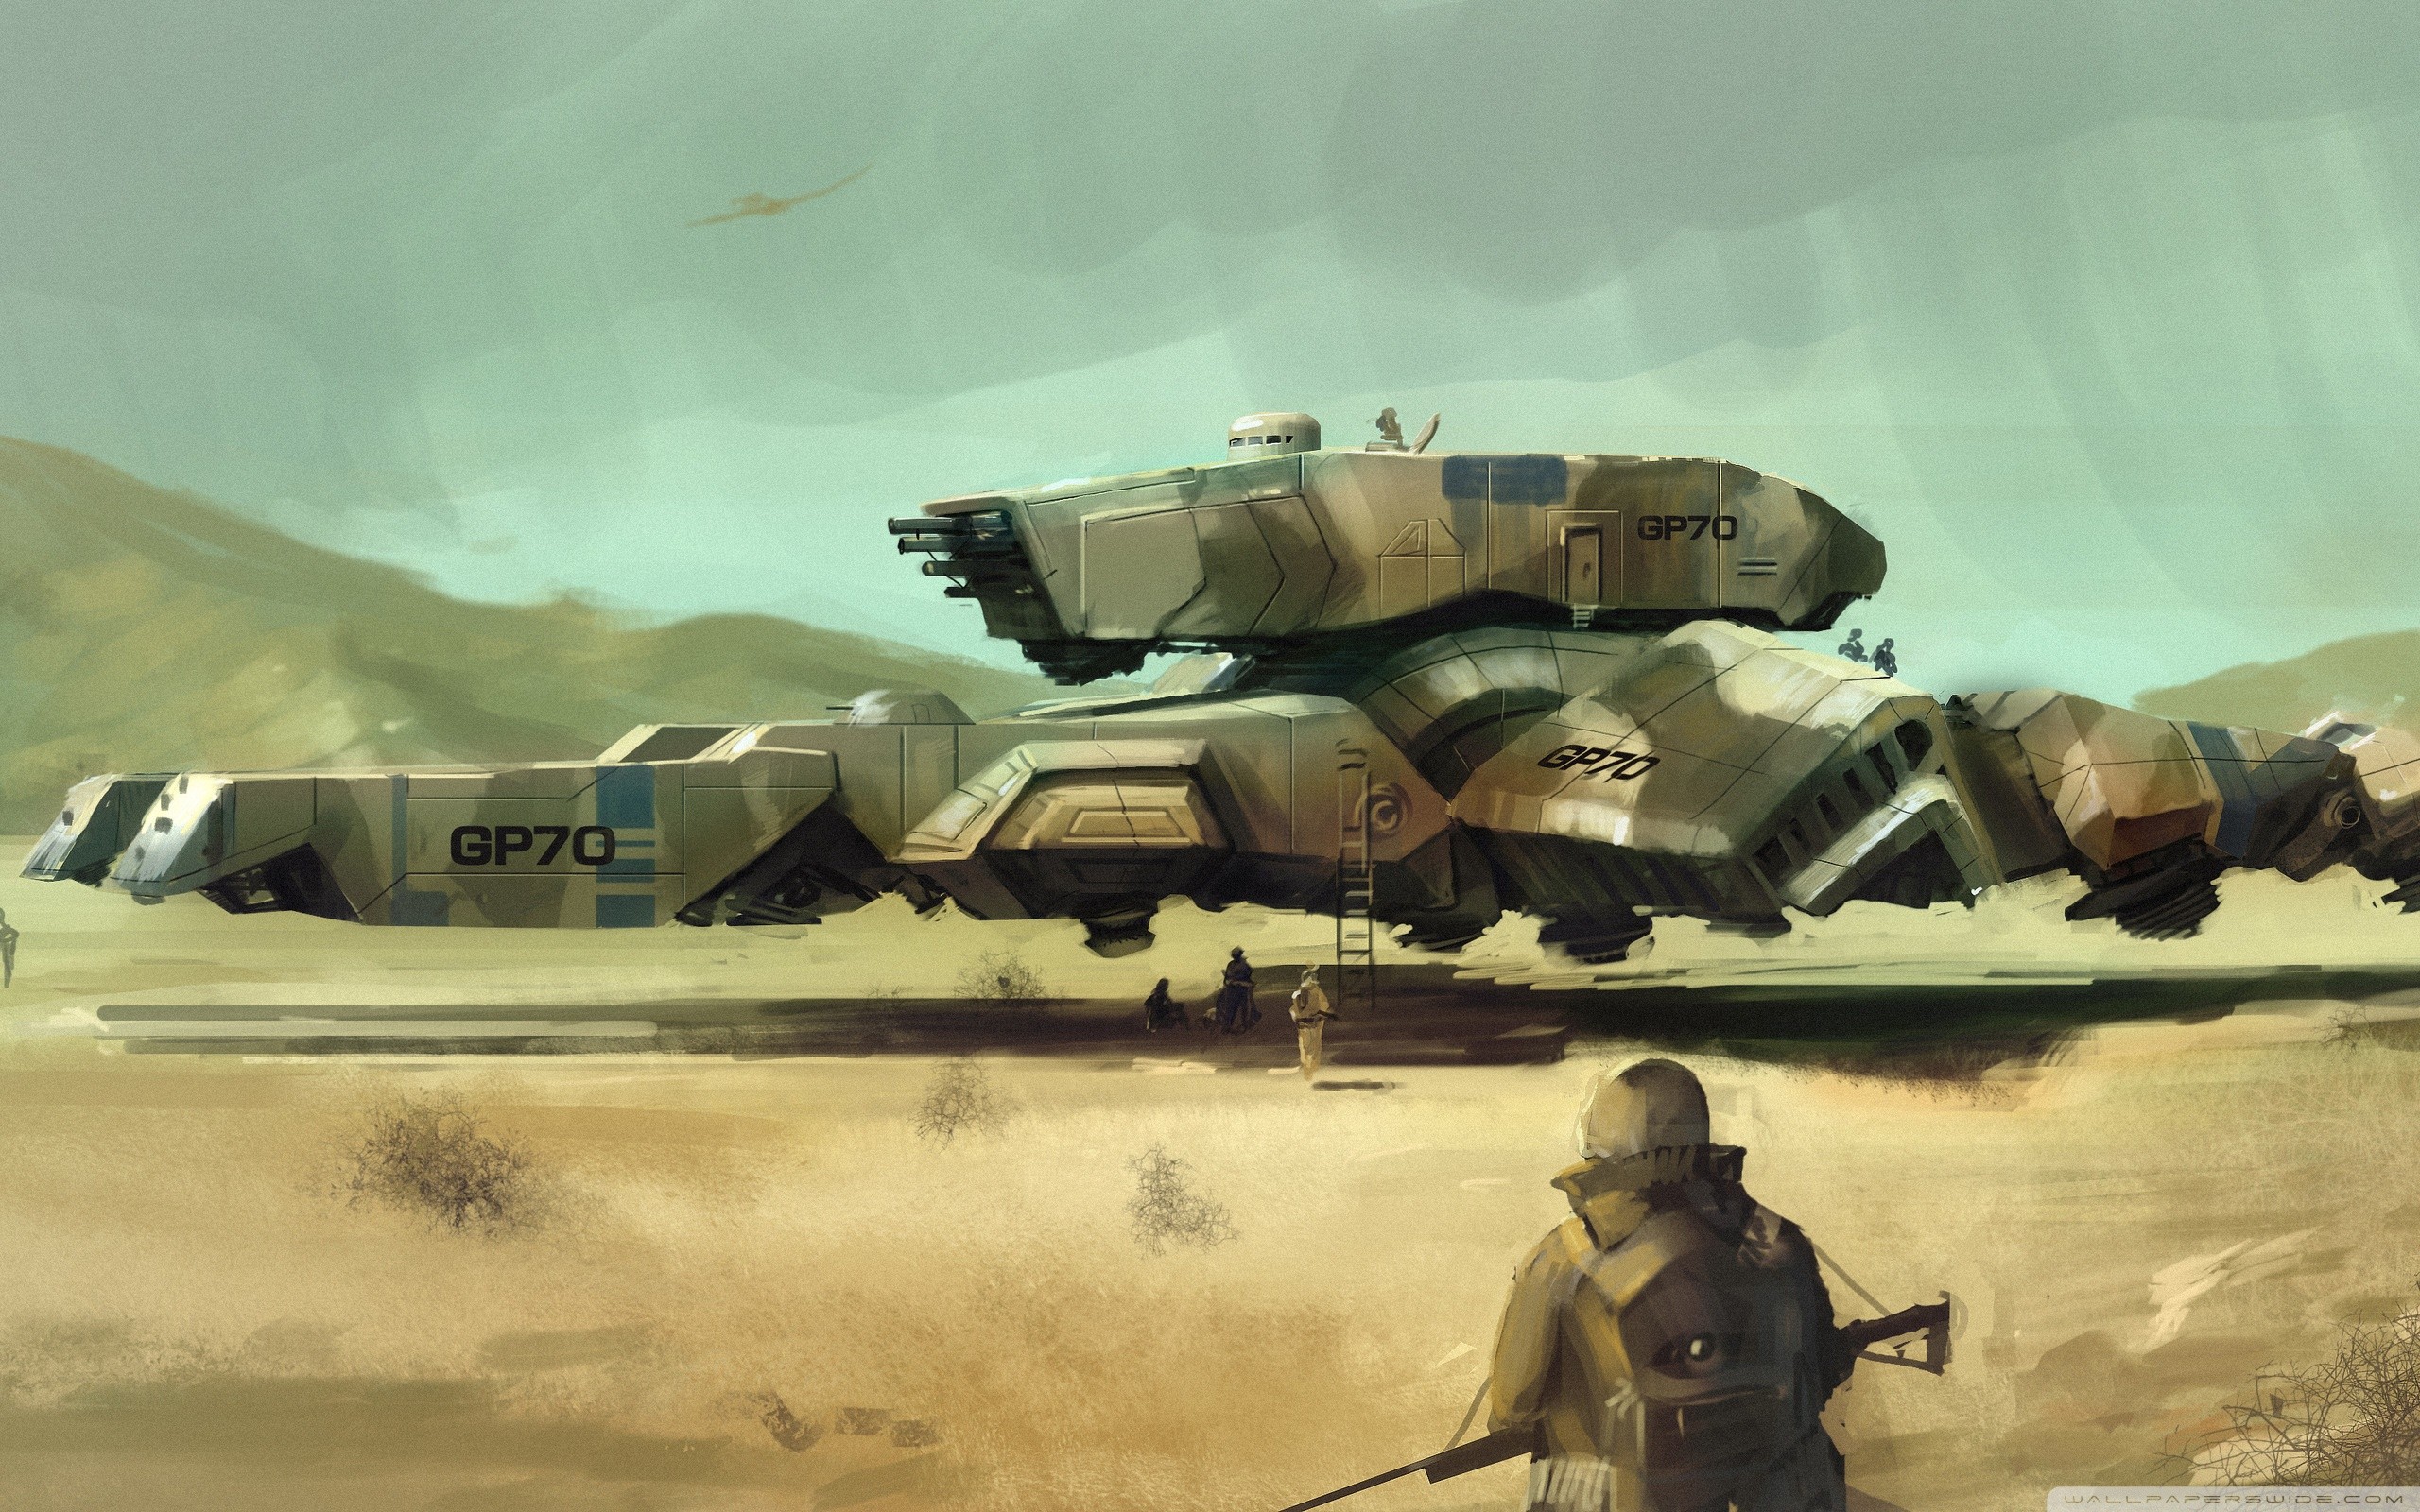 soldiers, military, desert, science fiction, hovercraft wallpaper